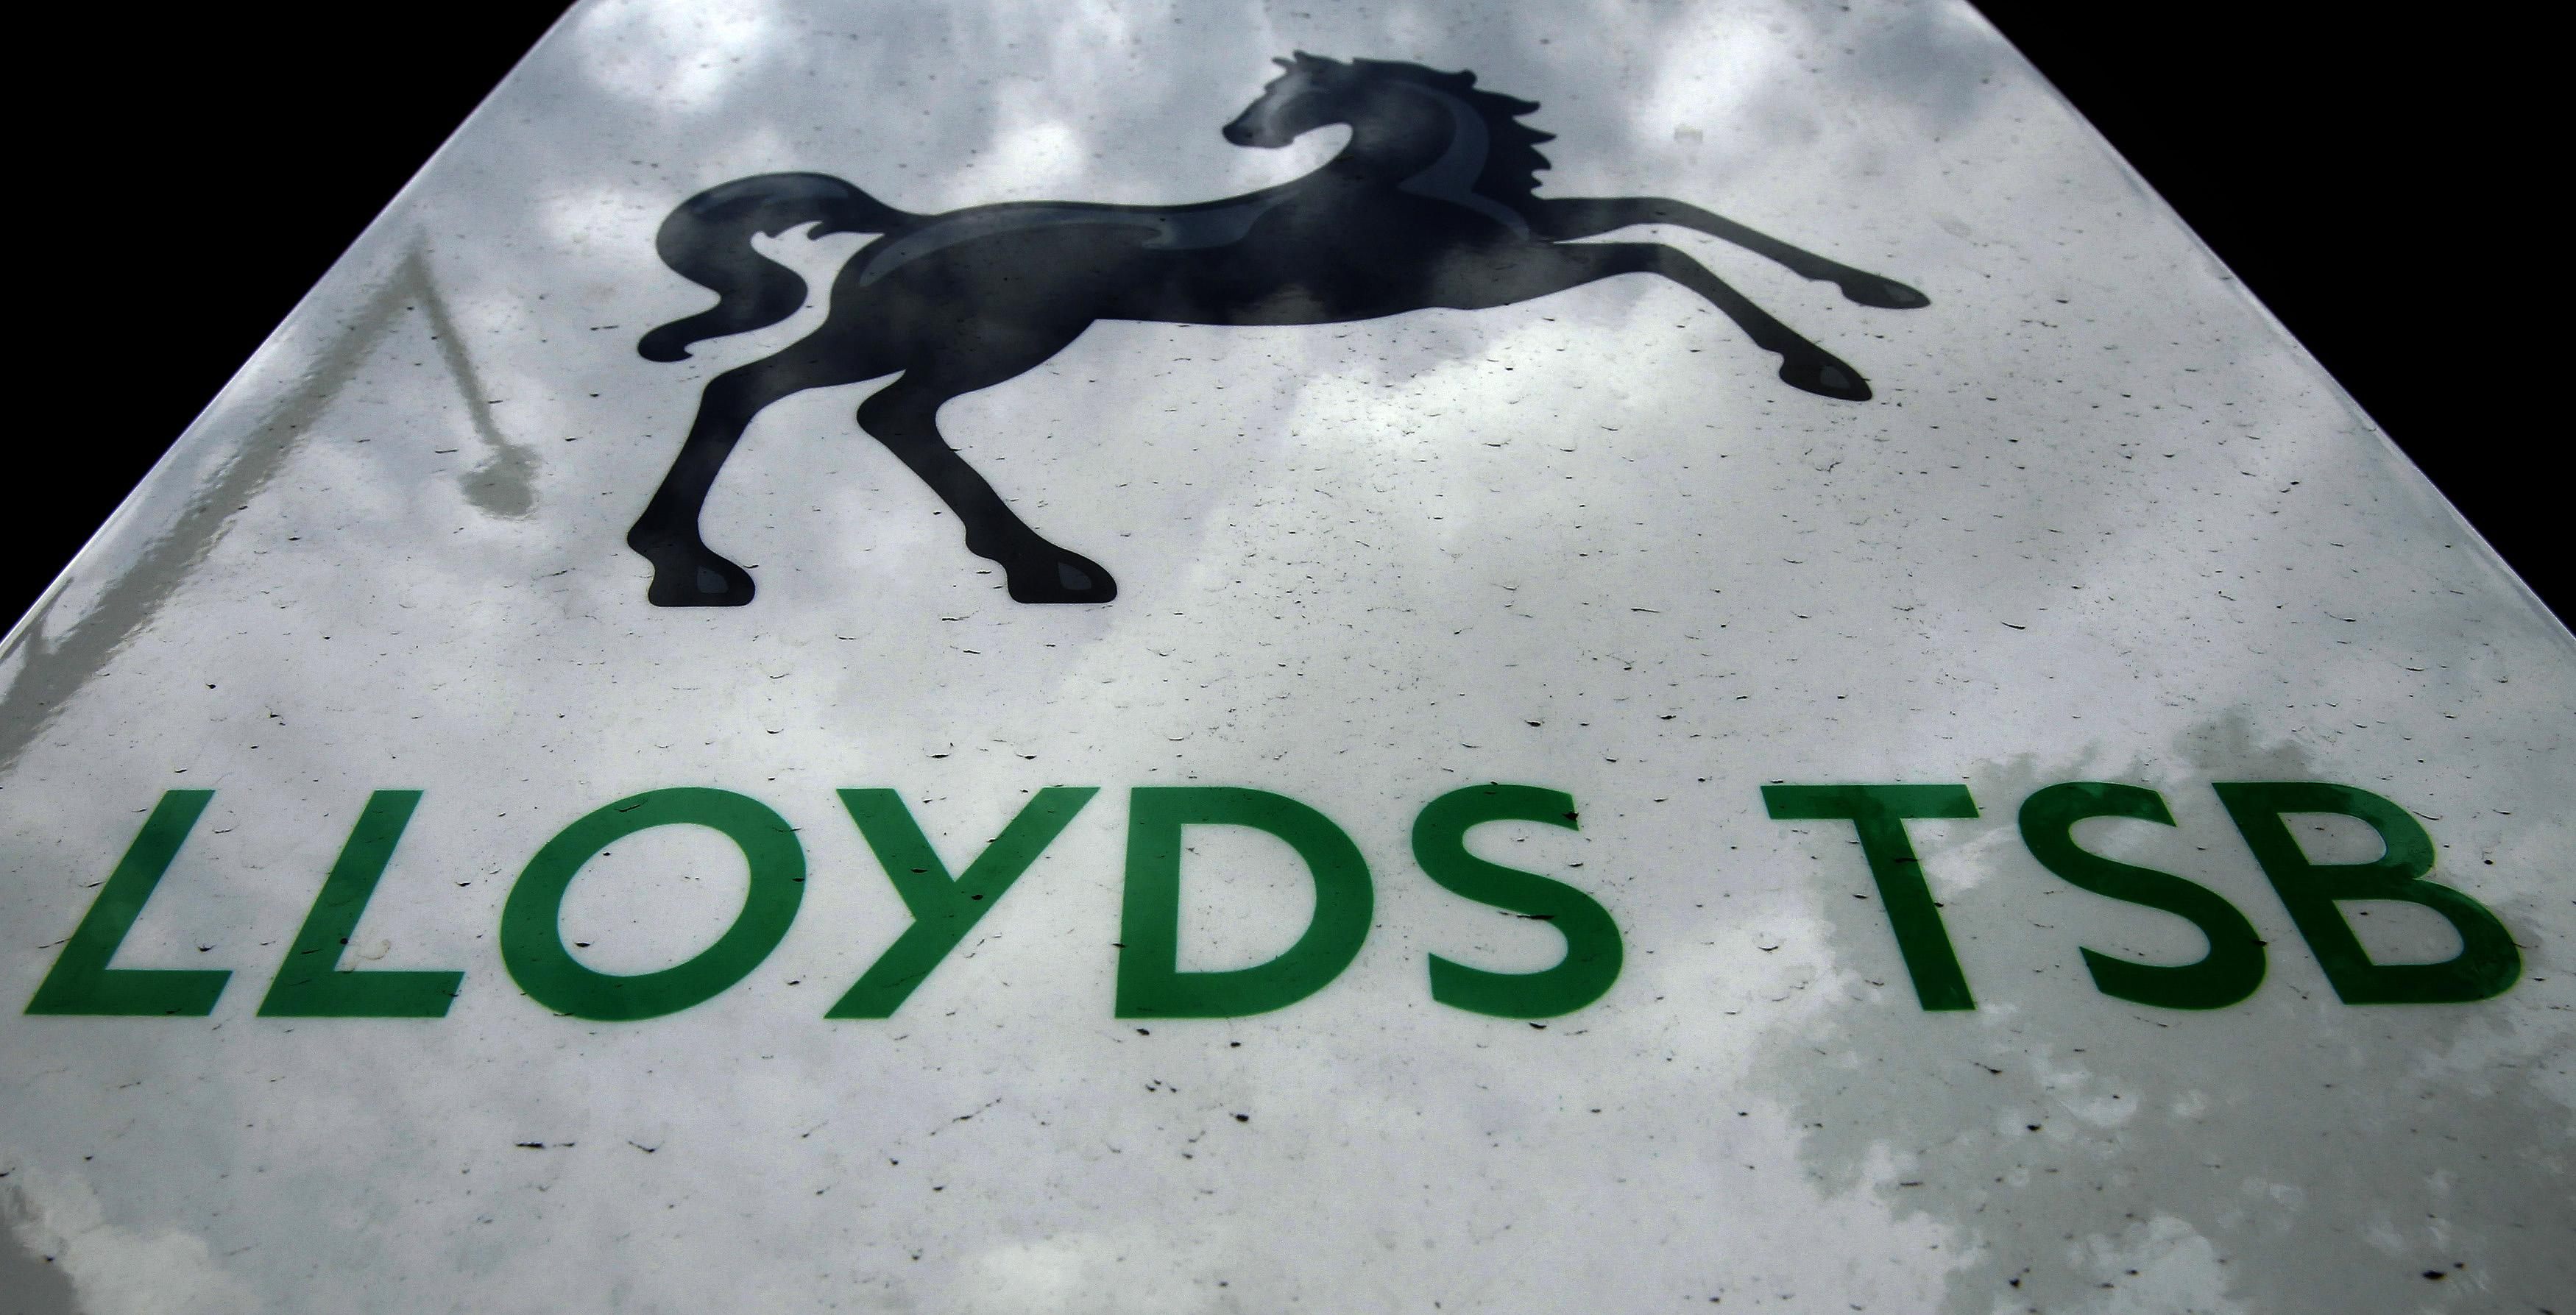  Britain pumped 20.5 billion pounds into Lloyds during the global financial crisis, leaving taxpayers holding 38.7 percent. Photo: Reuters